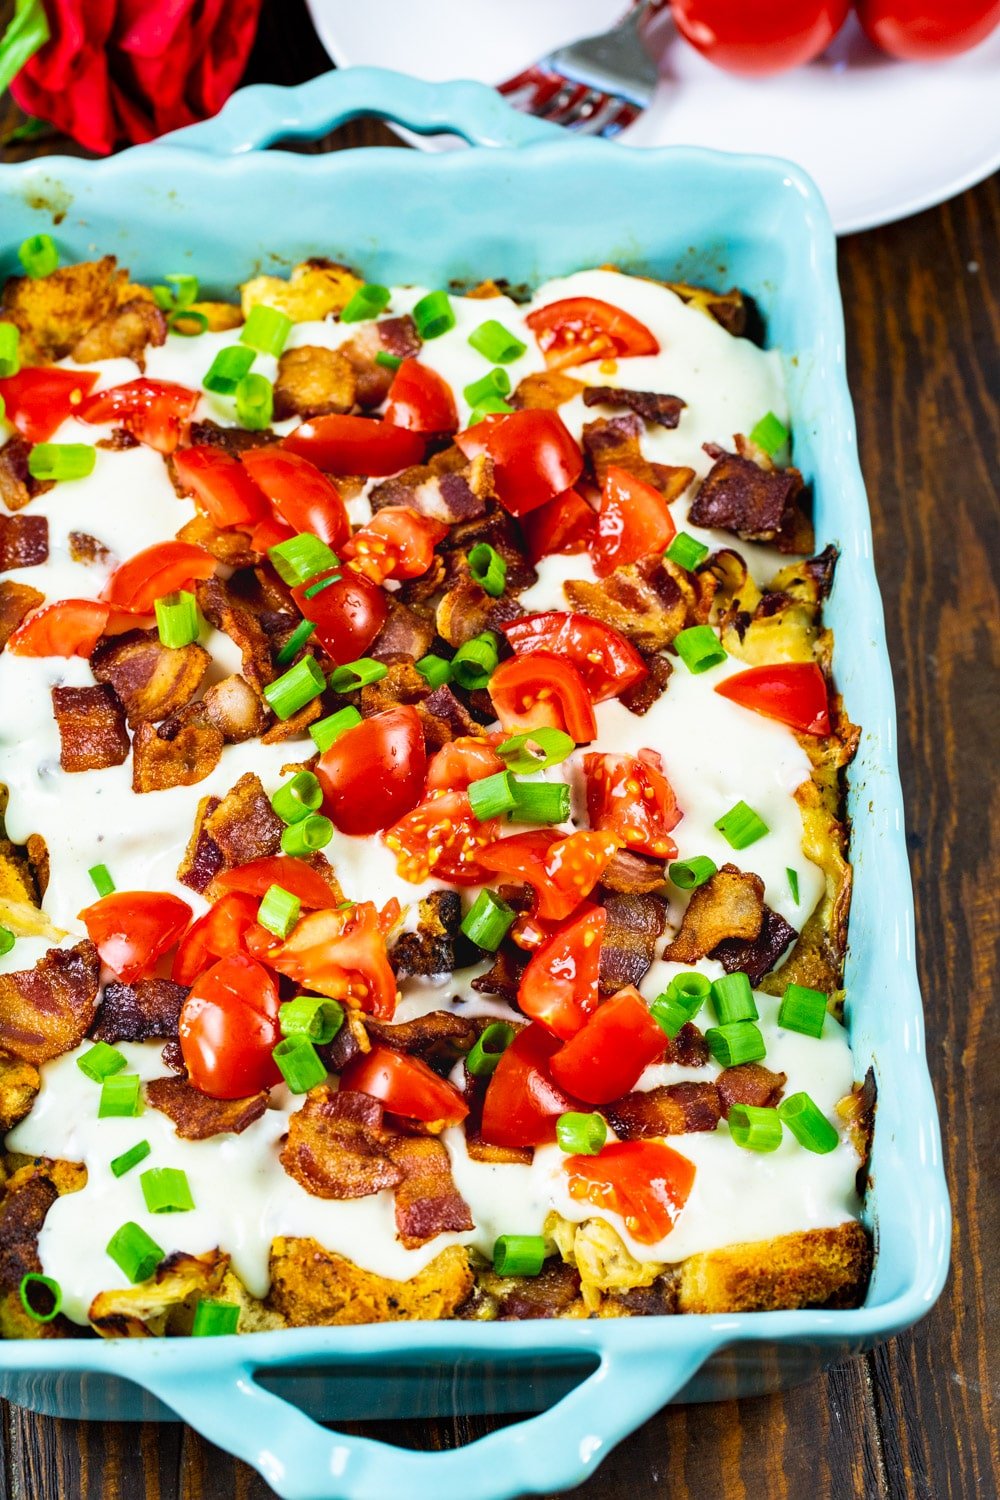 Casserole with Hot Brown Sandwich ingredients in a baking dish.